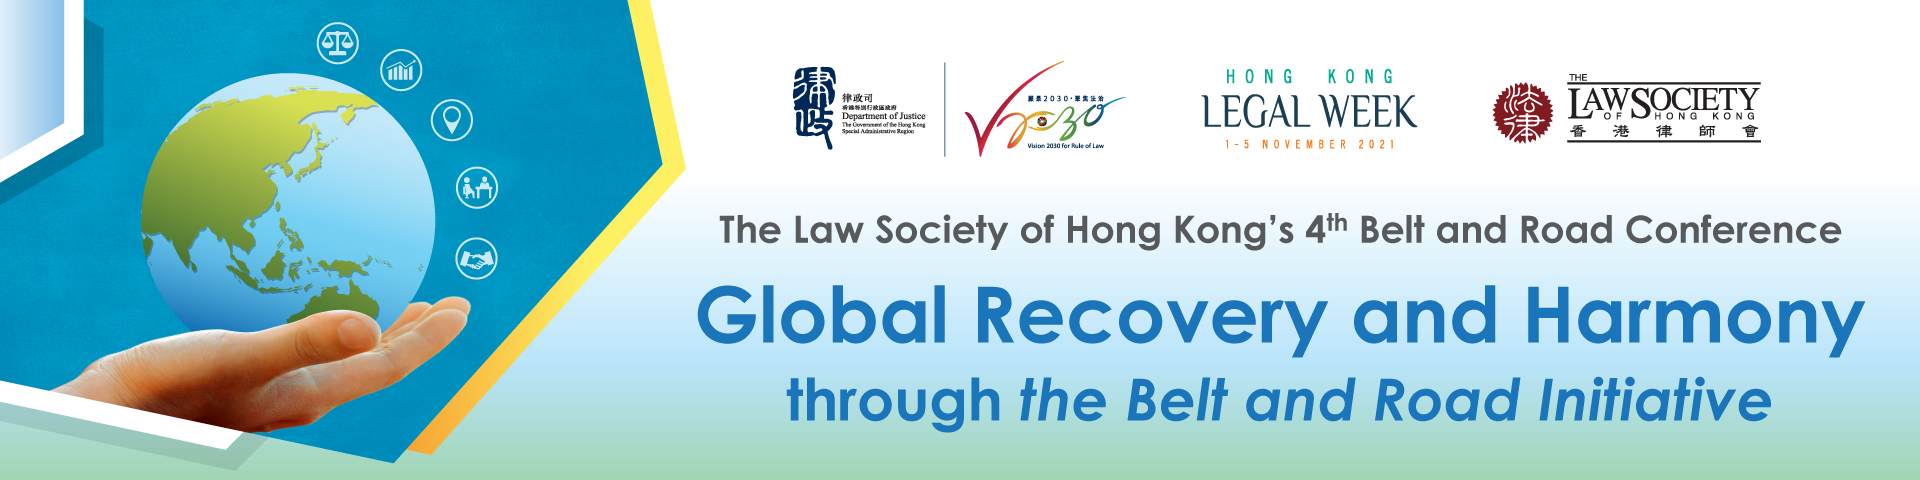 4th Belt and Road Conference by The Law Society of Hong Kong